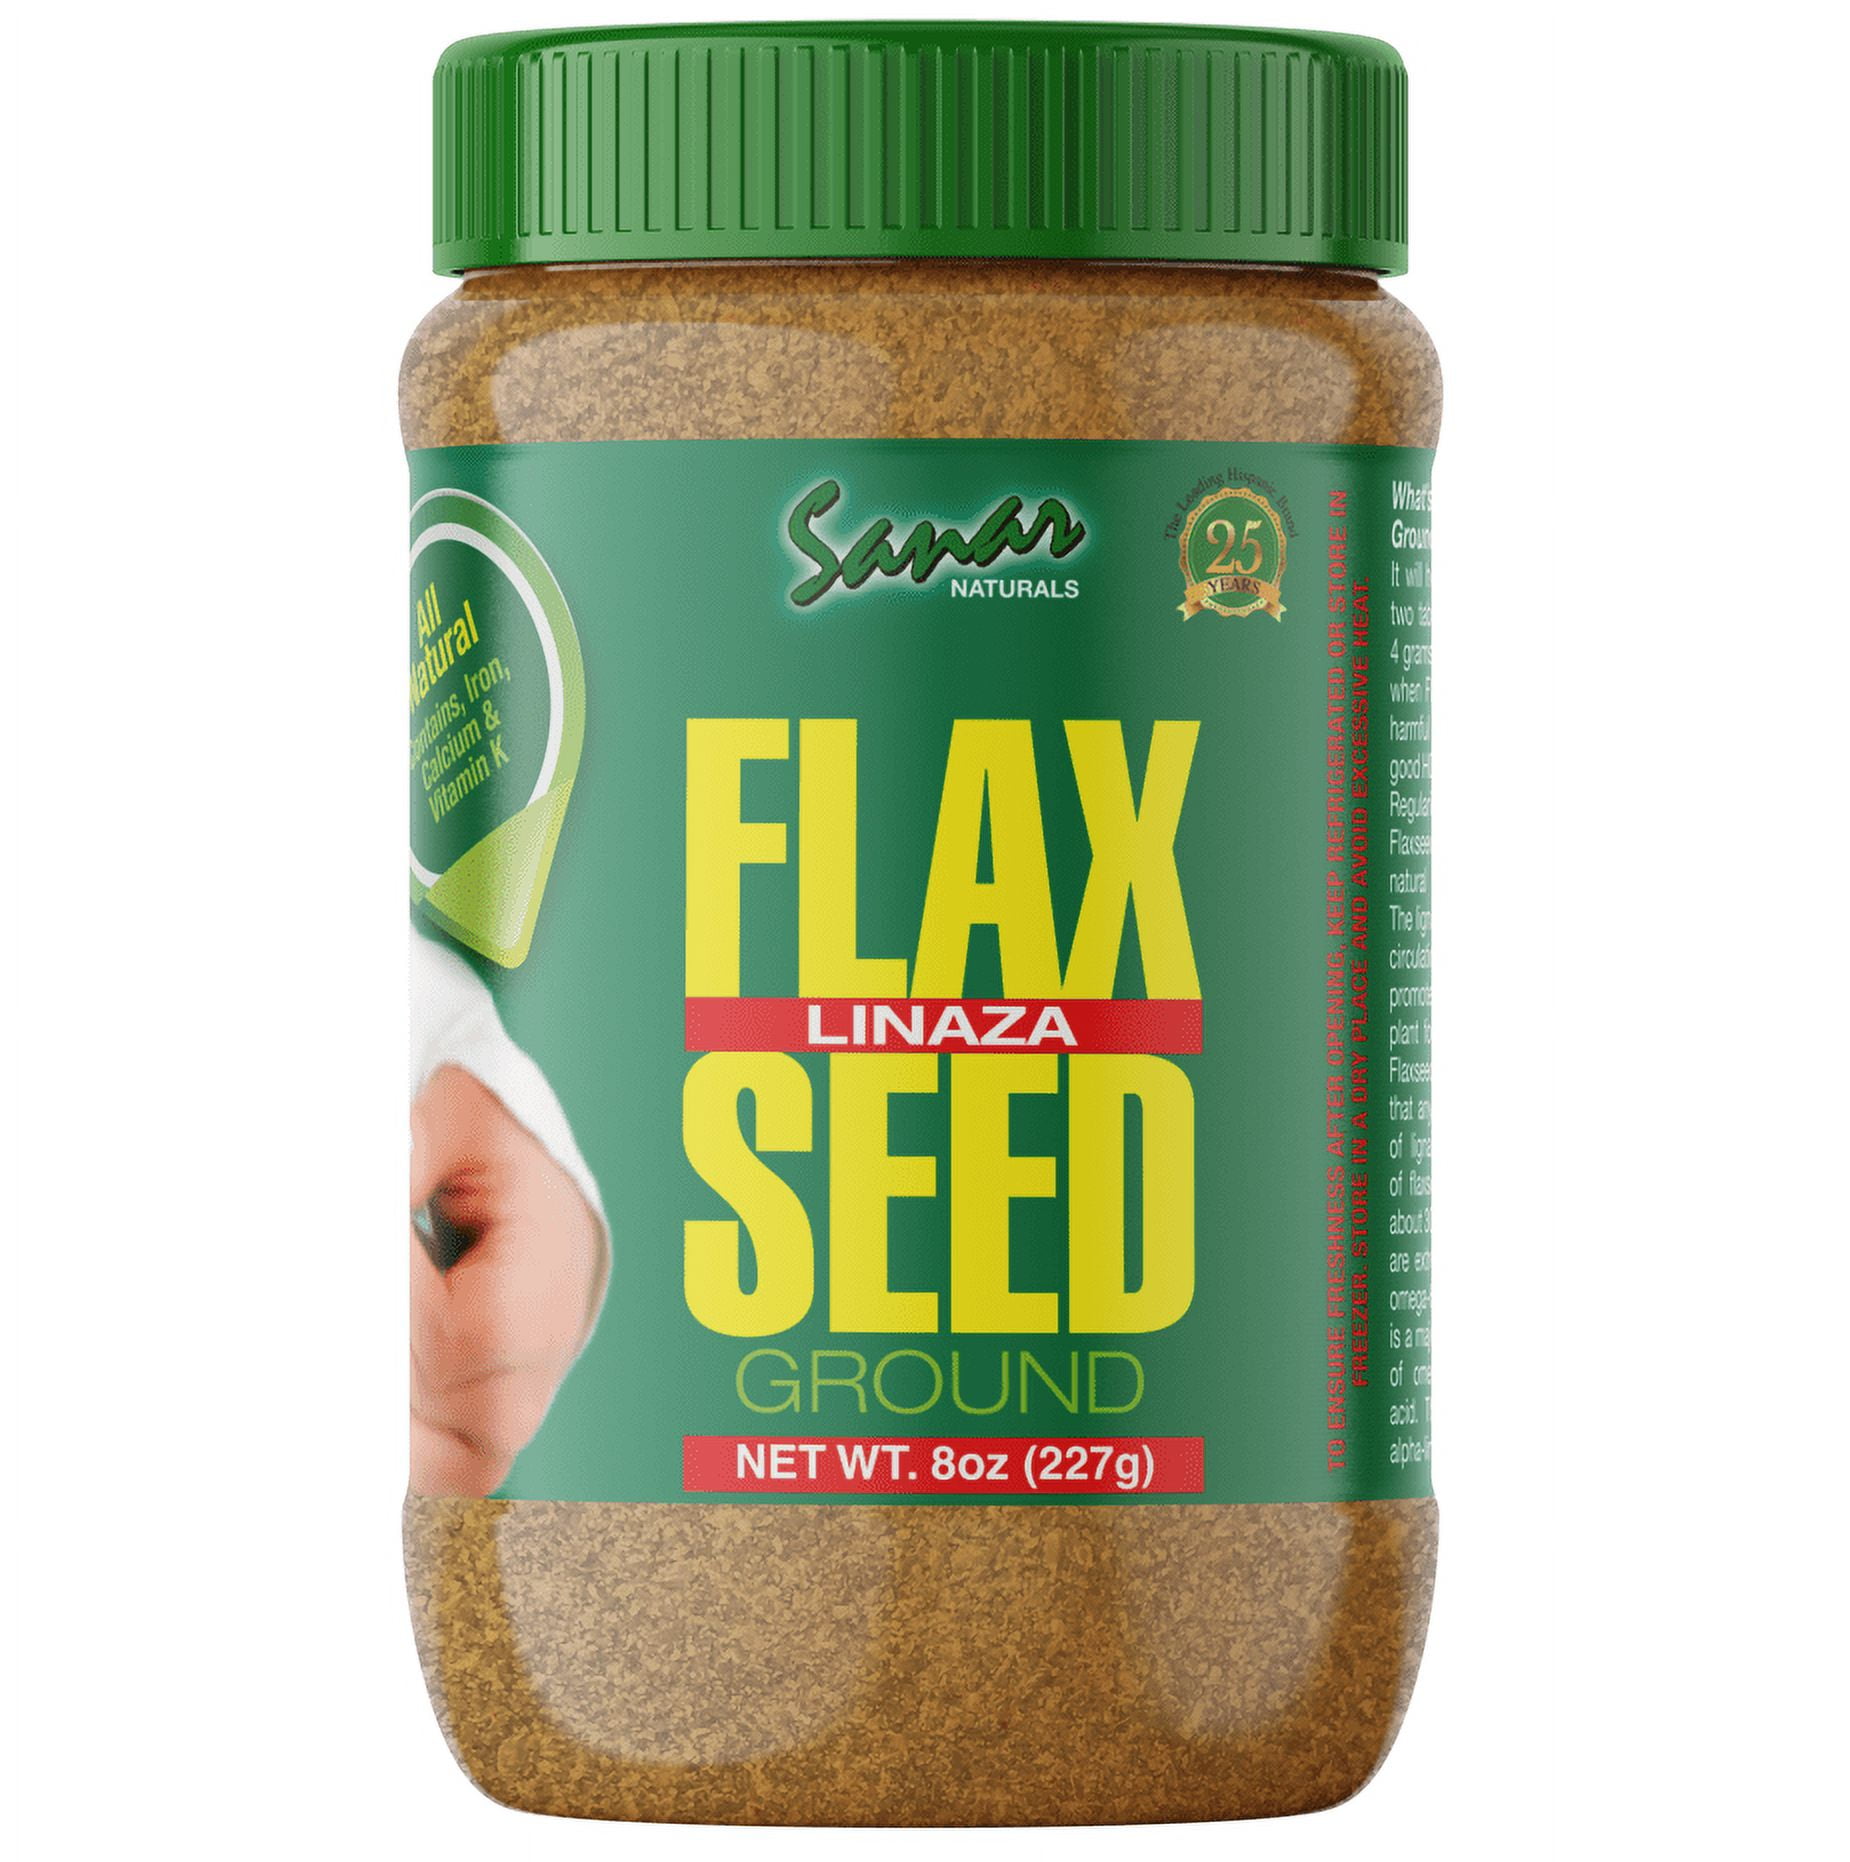 Organic Flax Seed Grinding Kit - Flaxseed Grinder, Brown Flax Seeds, Book &  Instructions - Omega Oils, Fiber & Vegan Egg Substitute 